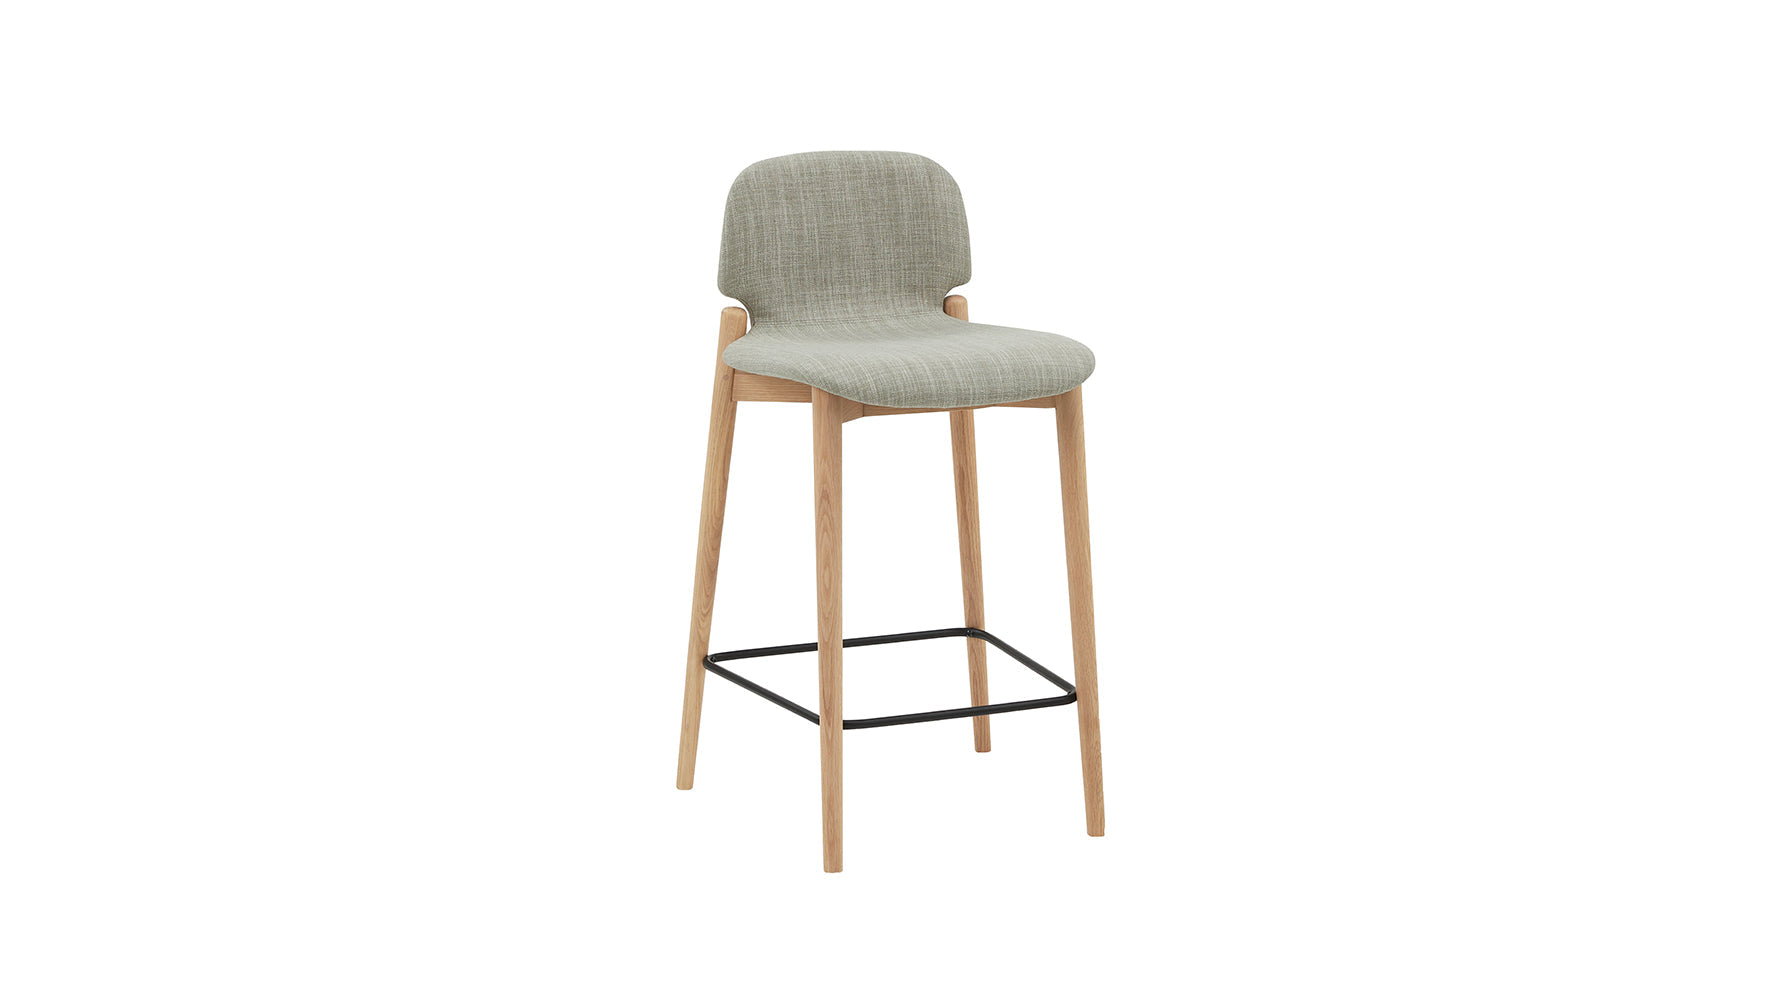 Dine In Stool, Counter, Oak/Taupe Fabric - Image 2